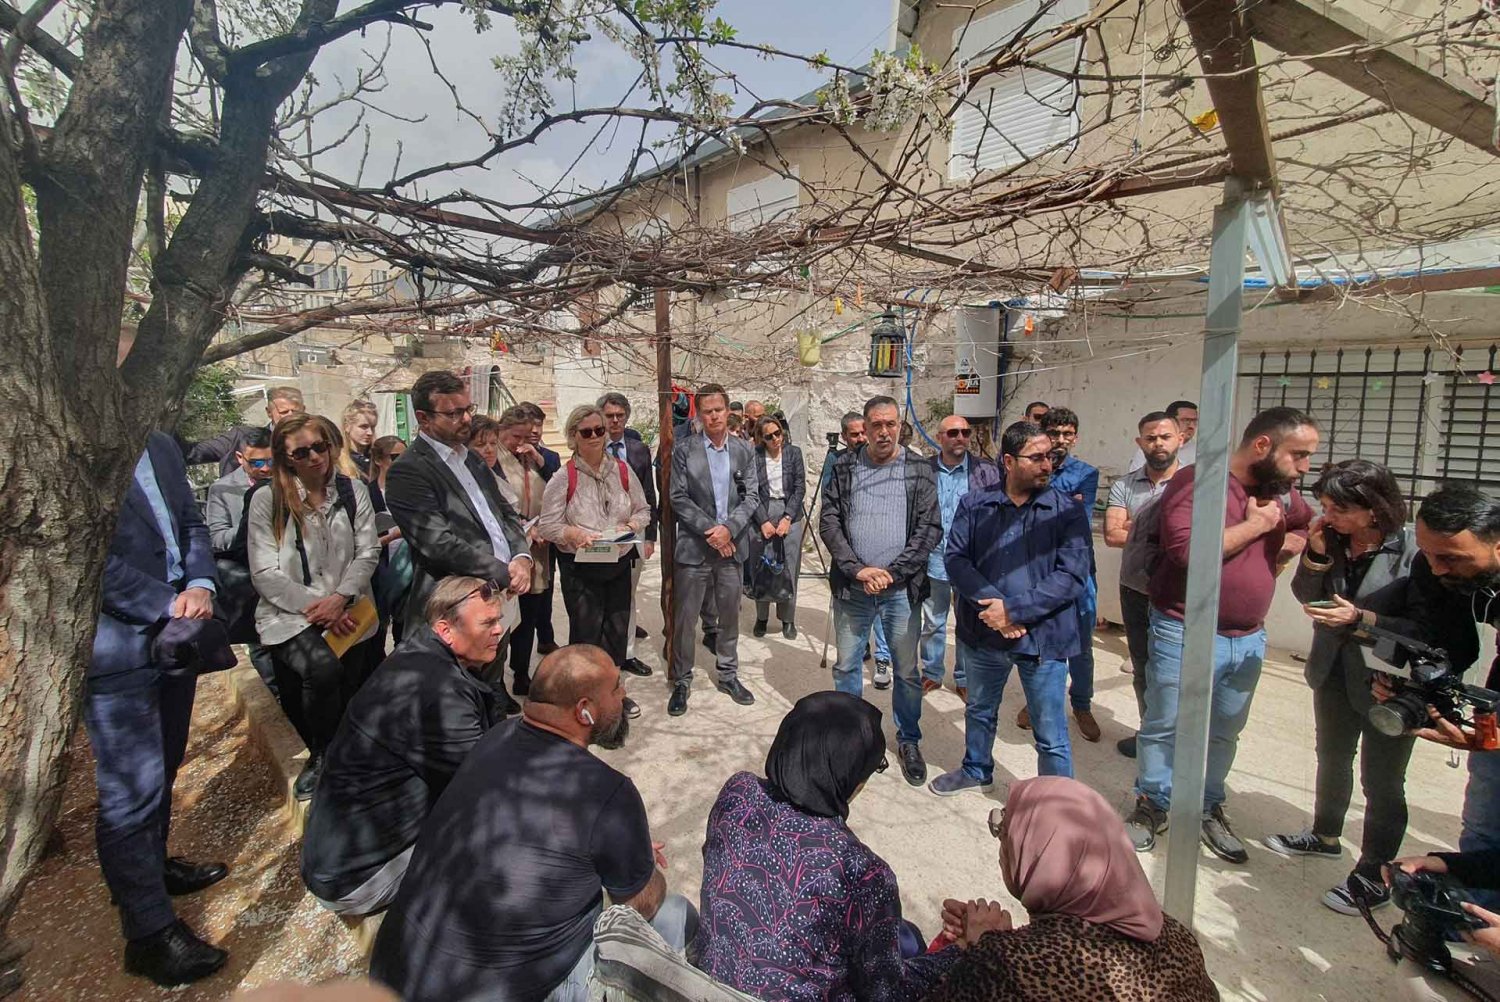 Diplomats from 17 countries pay a solidarity visit to the homes of Palestinian families threatened by imminent home demolition in East Jerusalem on March 13, 2023.